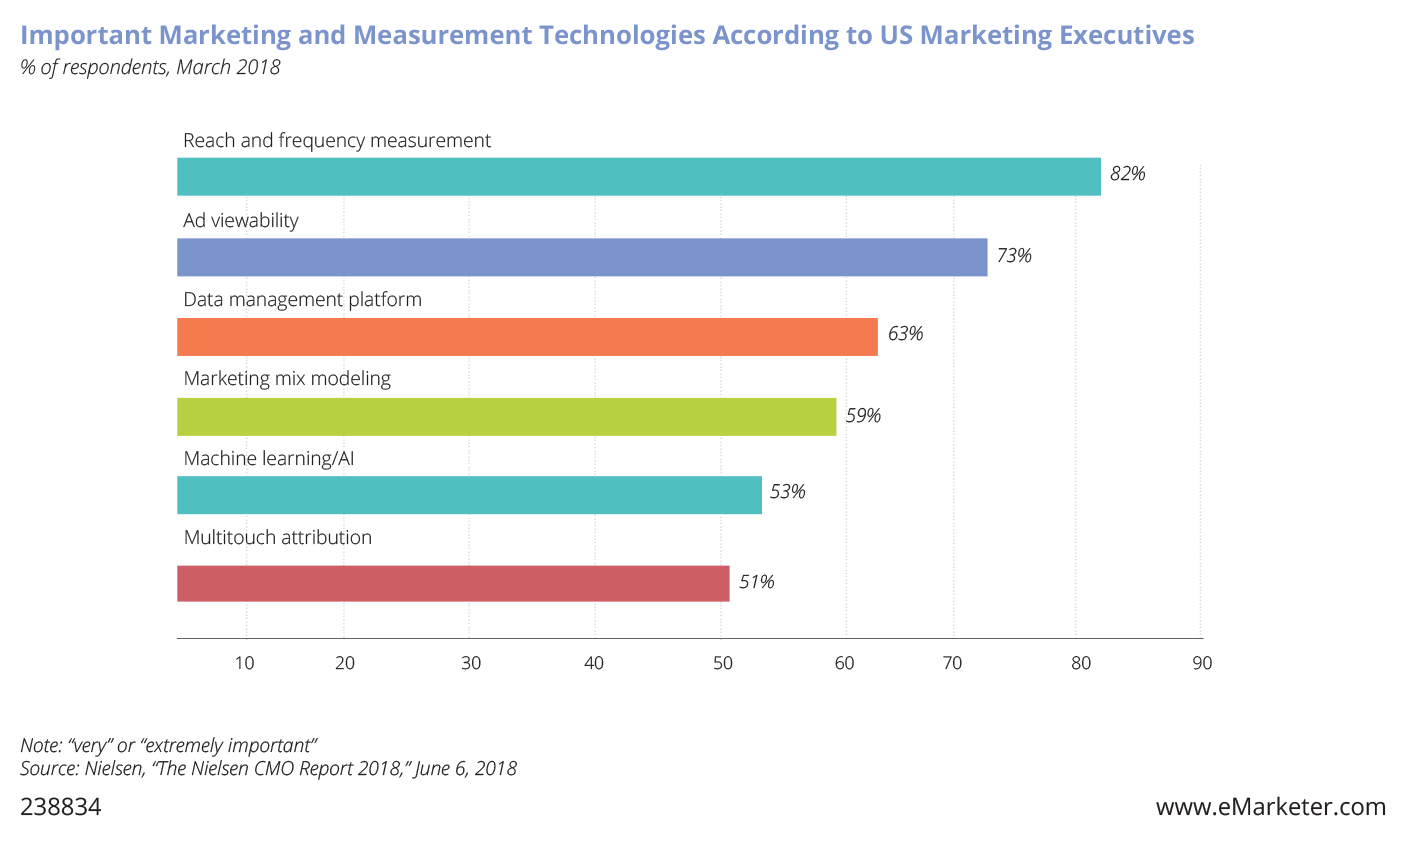 Chart: Important Marketing and Measurement Technologies According to U.S. Marketing Executives